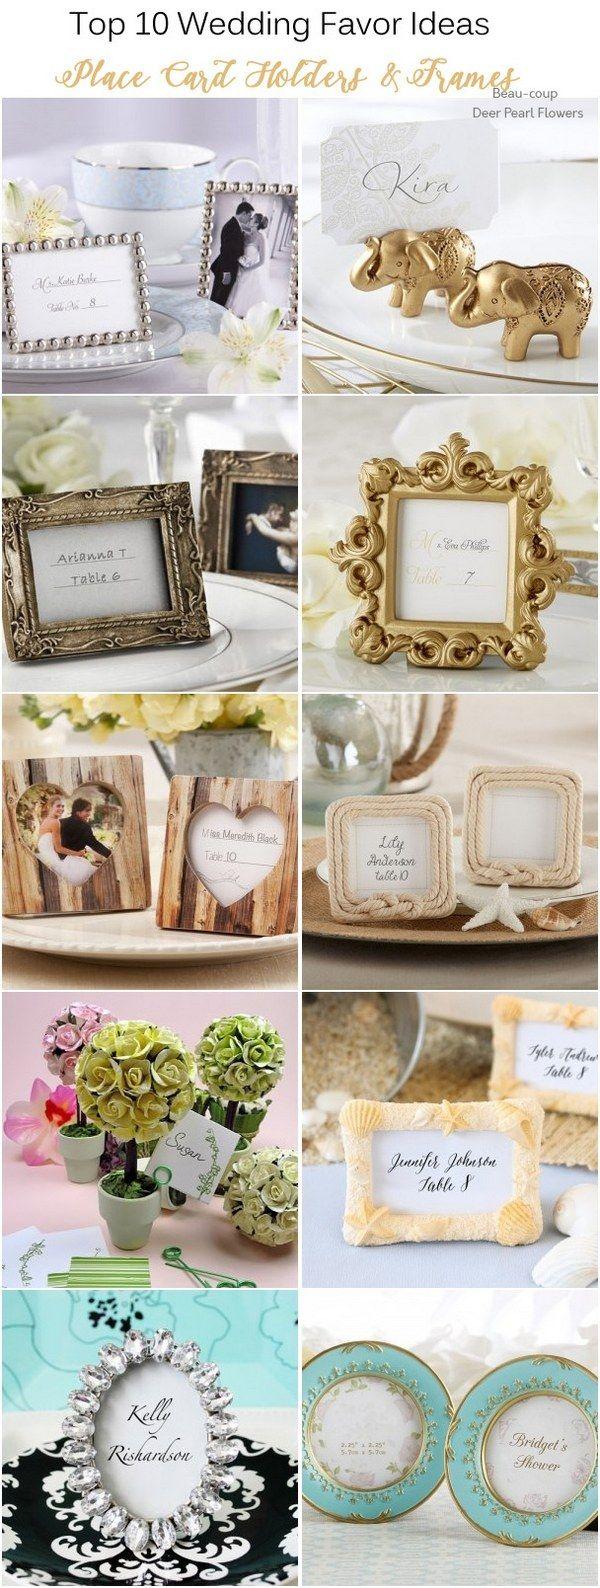 Wedding - Top 10 Wedding Favor Ideas That Your Guests Will Actually Like